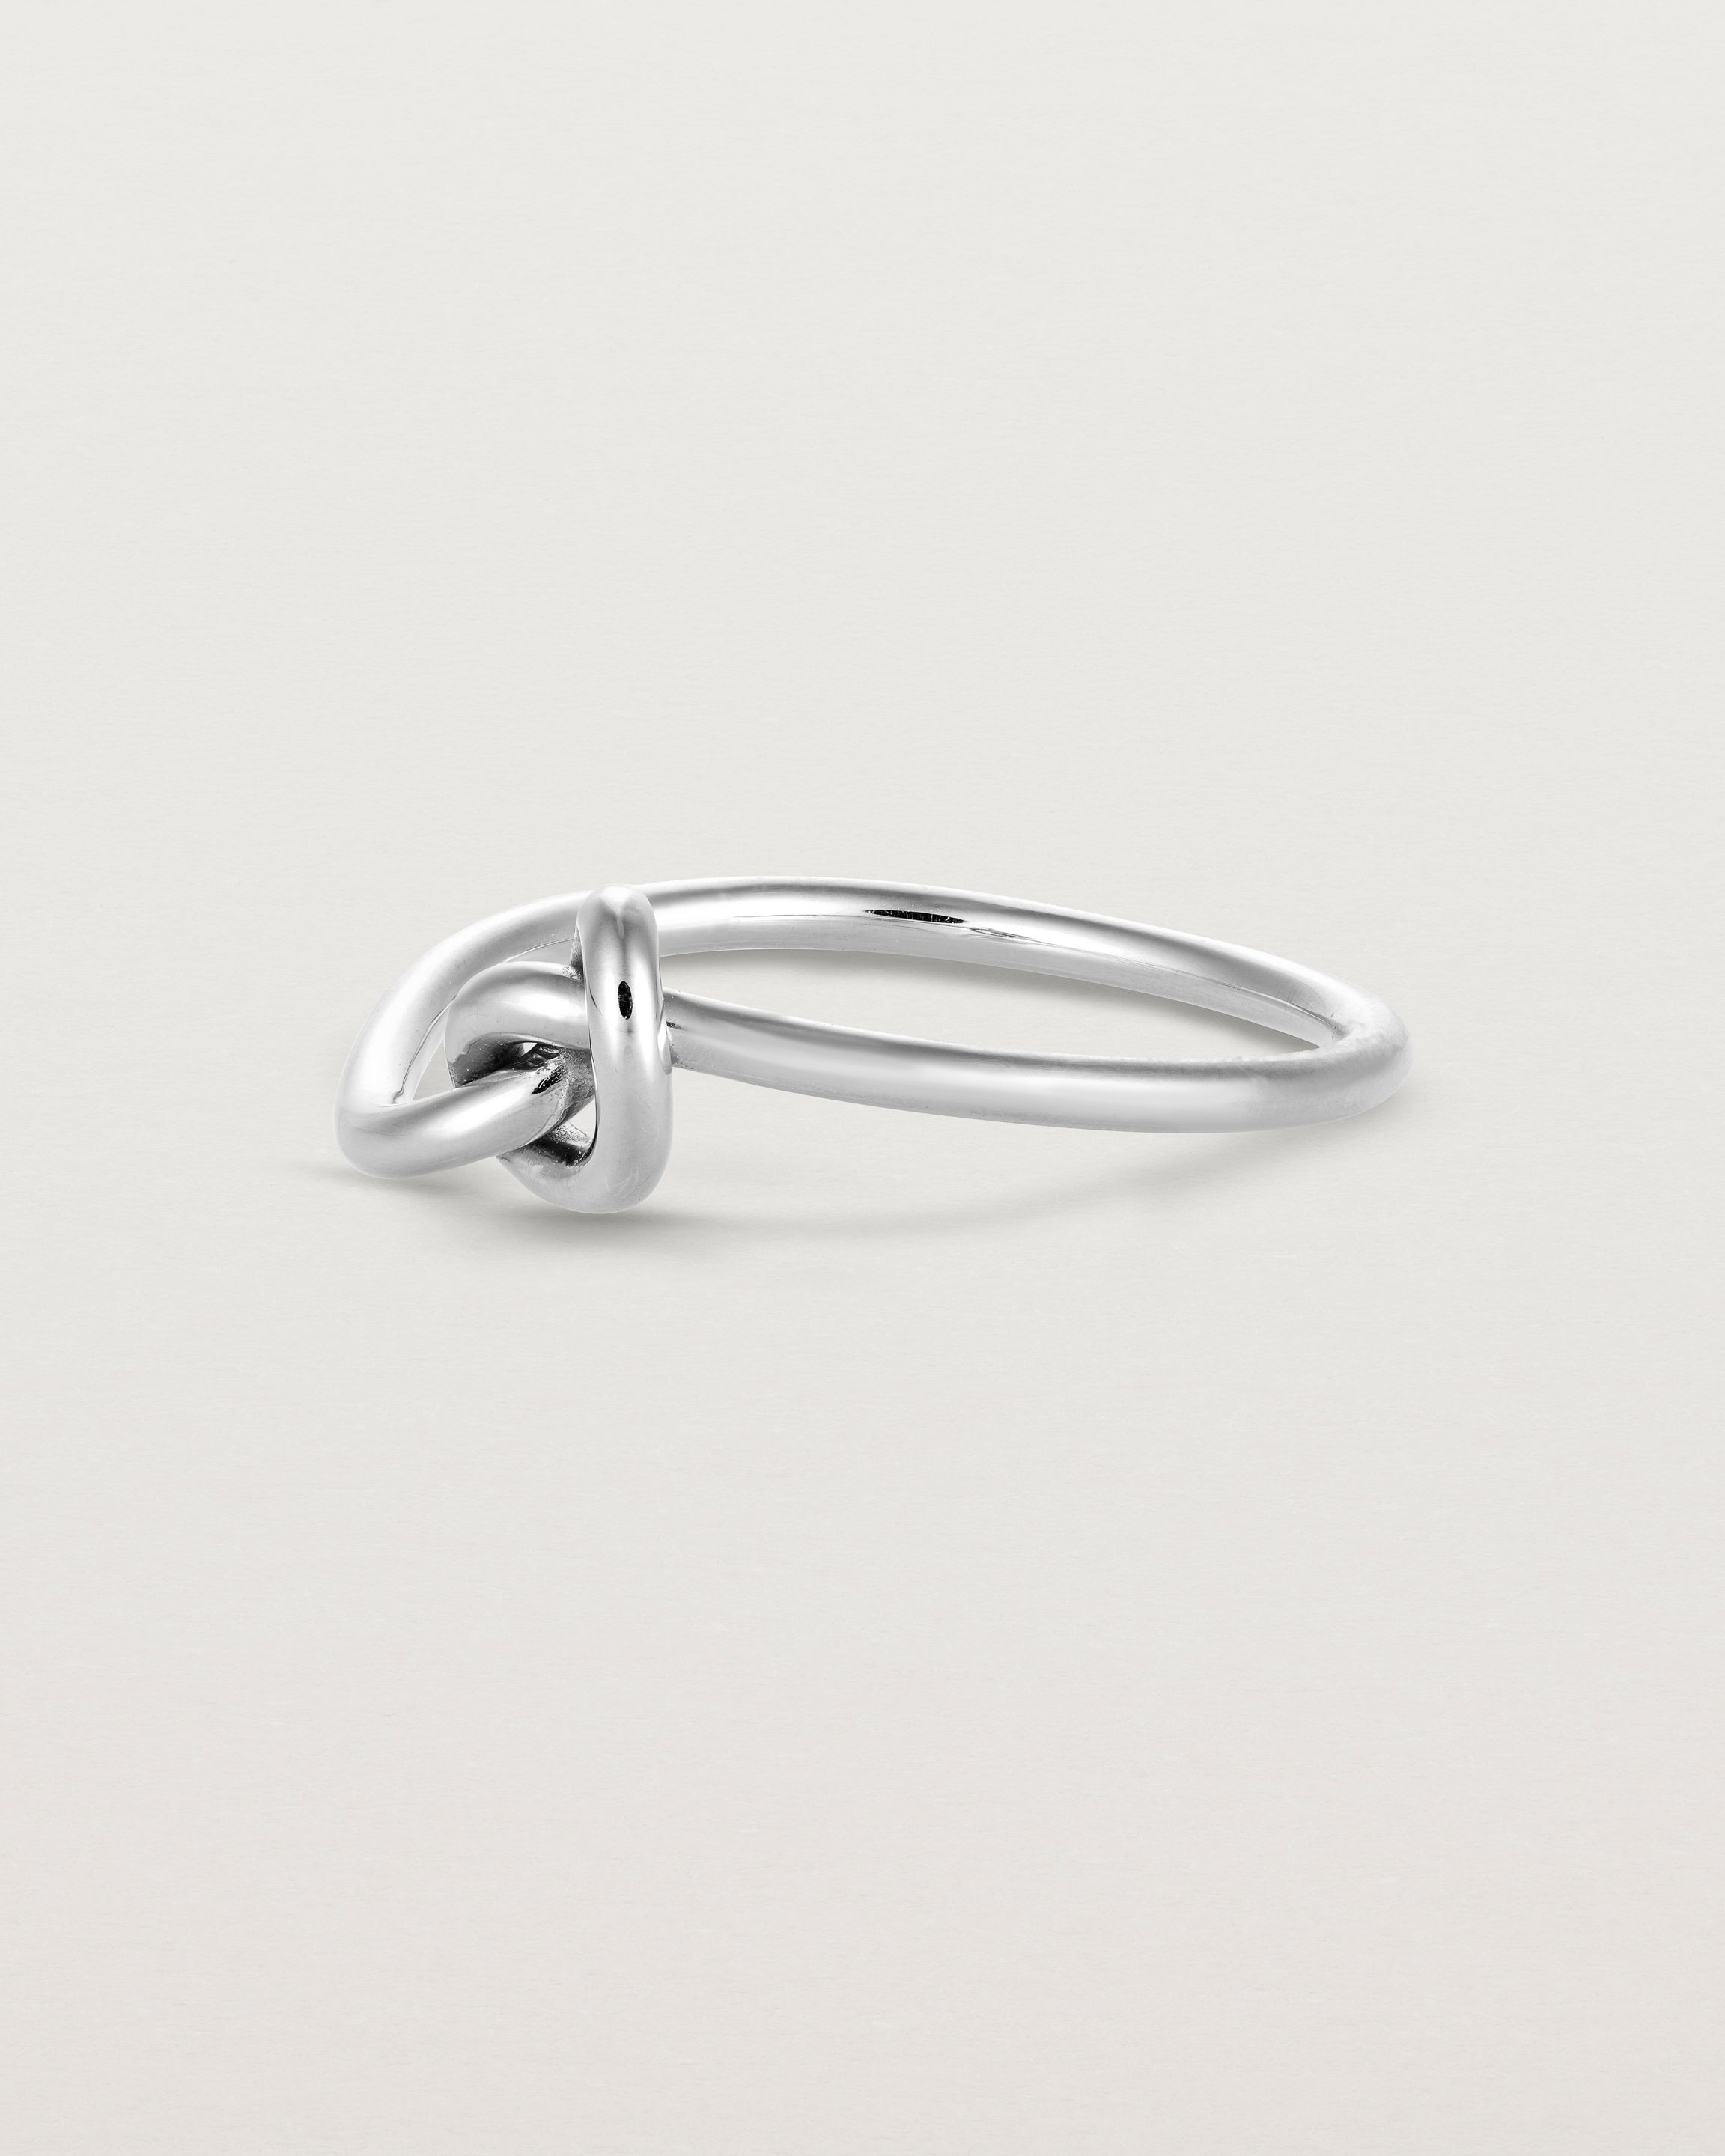 Angled view of the Cara Ring in sterling silver.